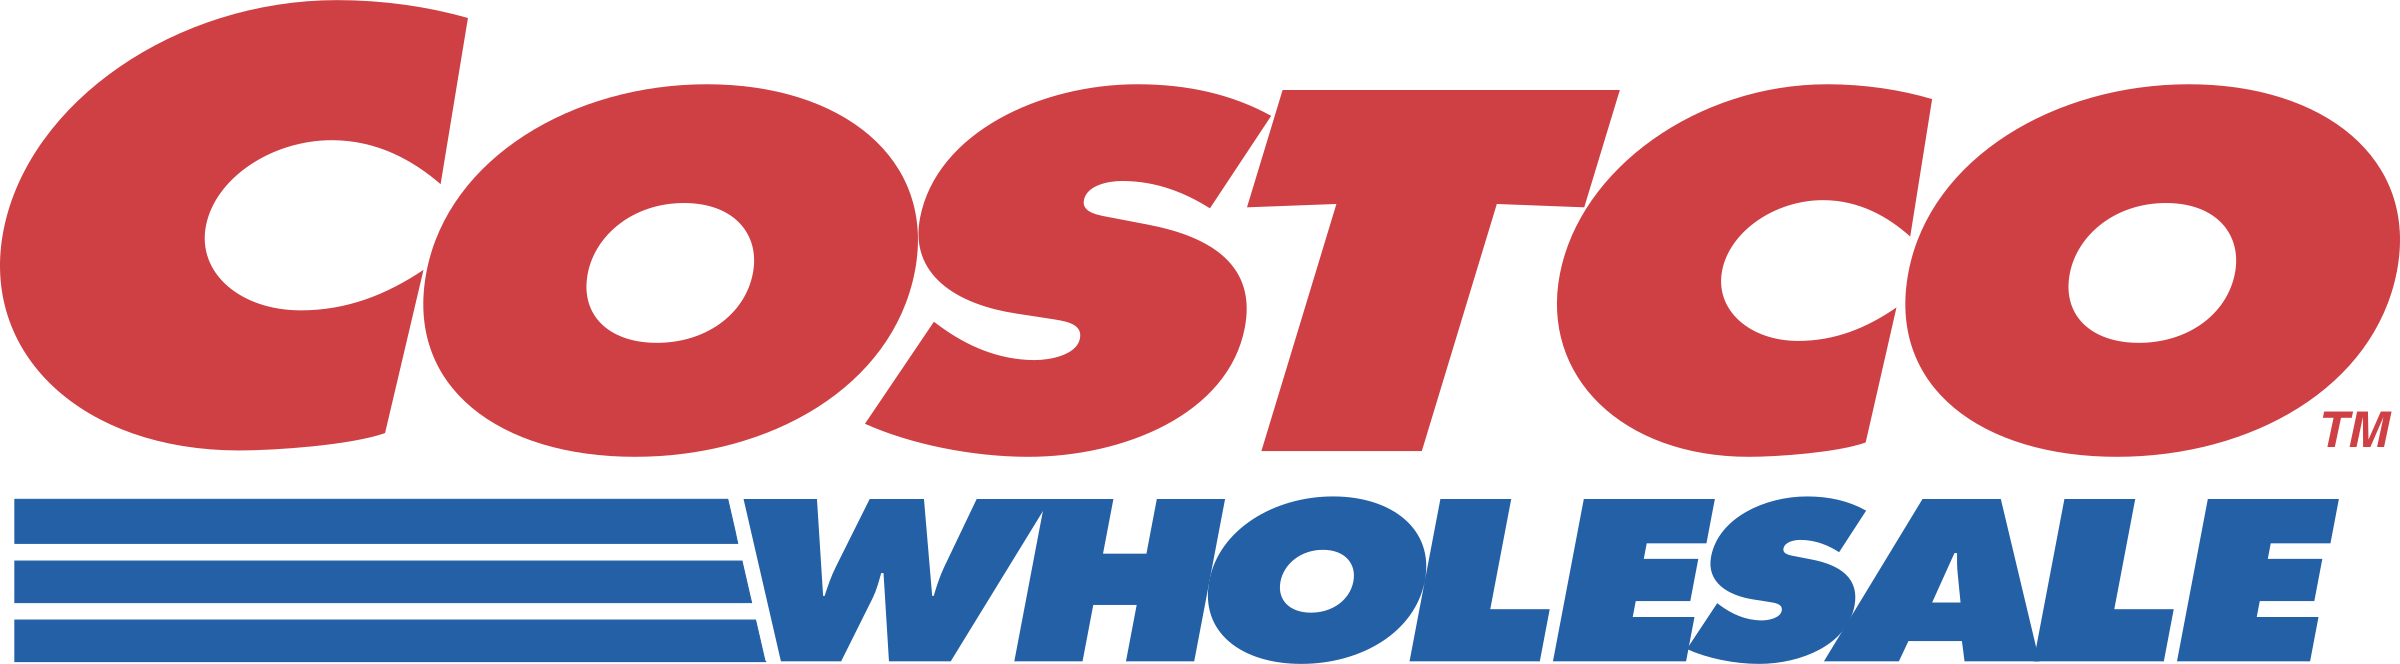 Costco Logo PNG Background Image